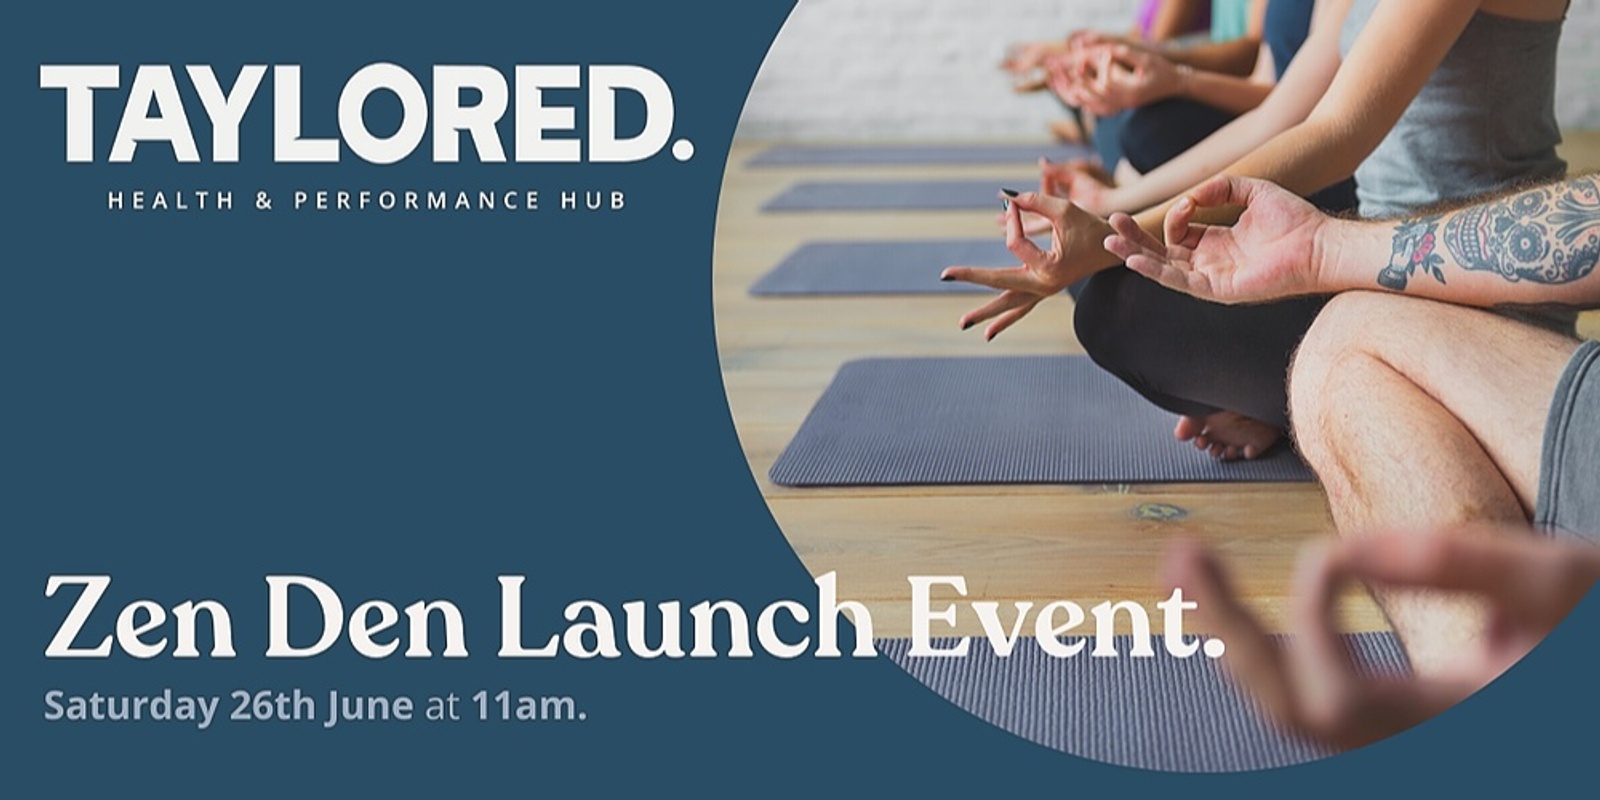 Banner image for Taylored Zen Den Launch Event